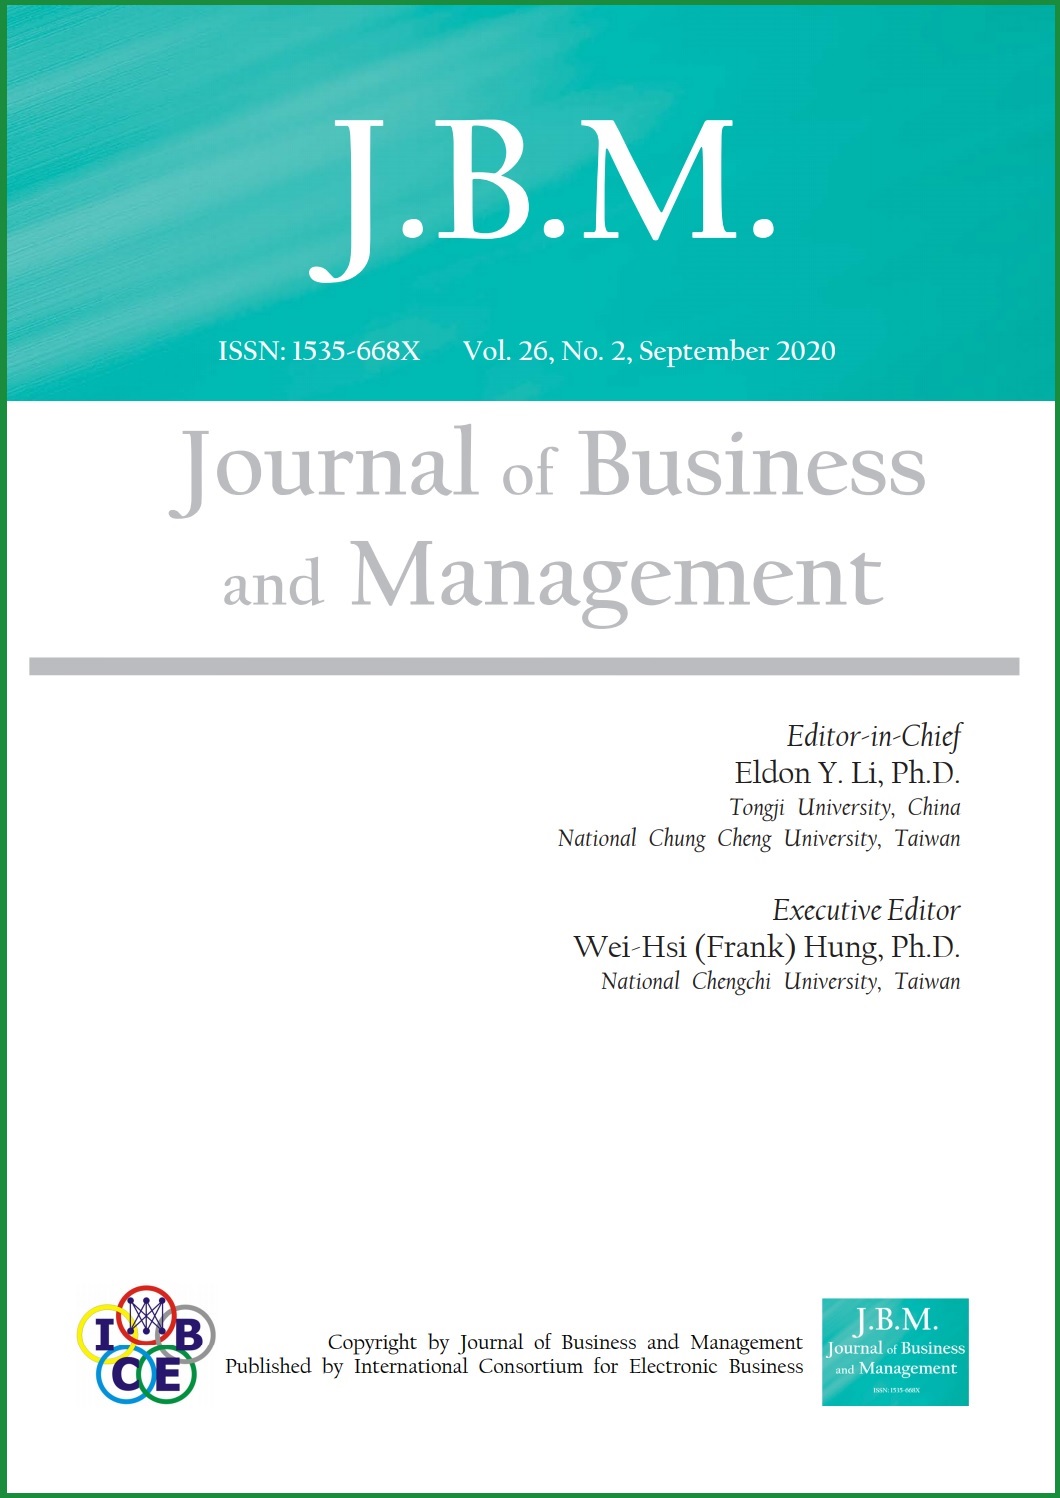 Journal of Business and Management